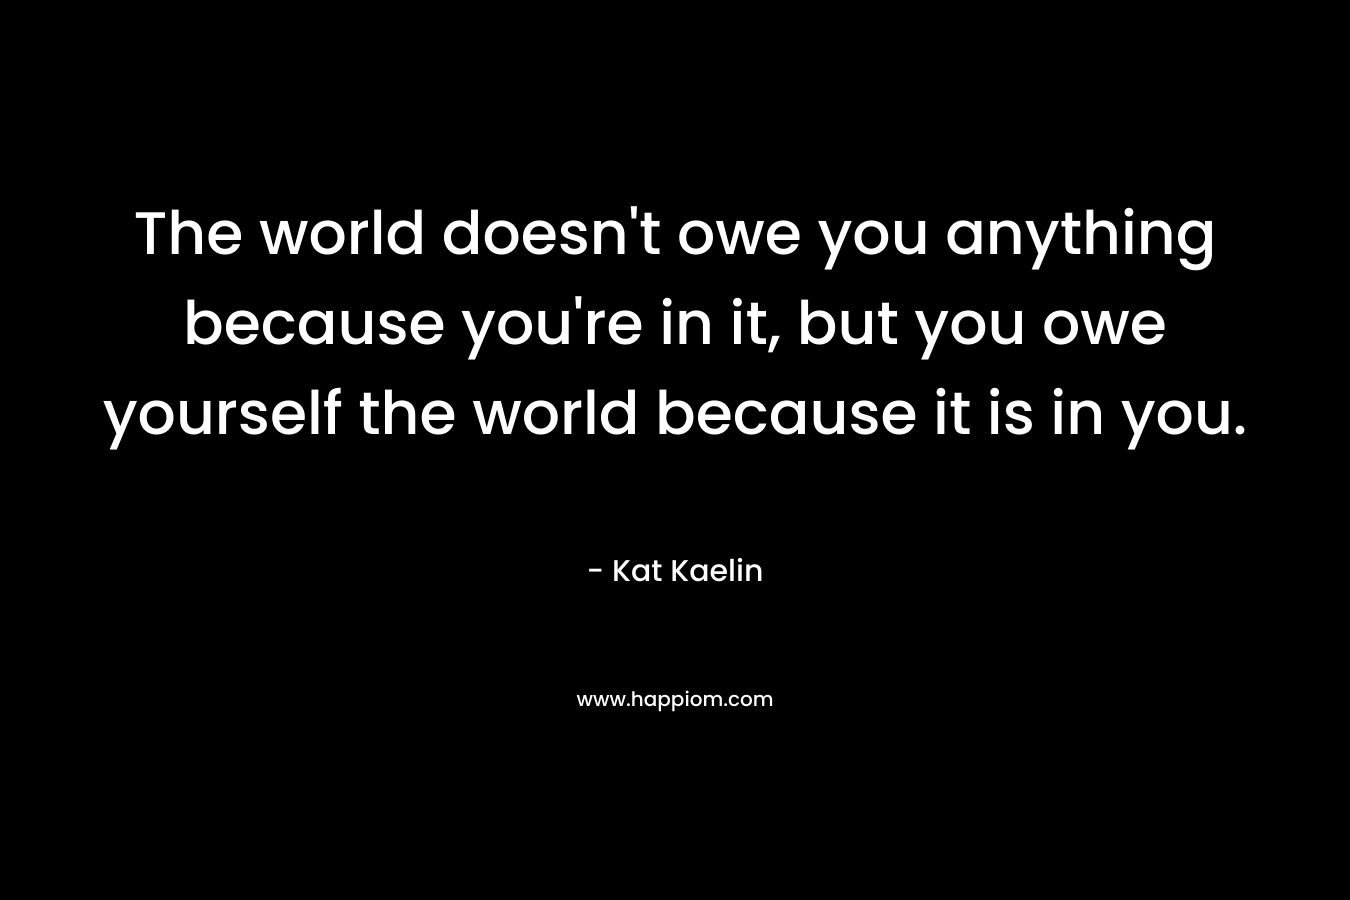 The world doesn’t owe you anything because you’re in it, but you owe yourself the world because it is in you. – Kat Kaelin